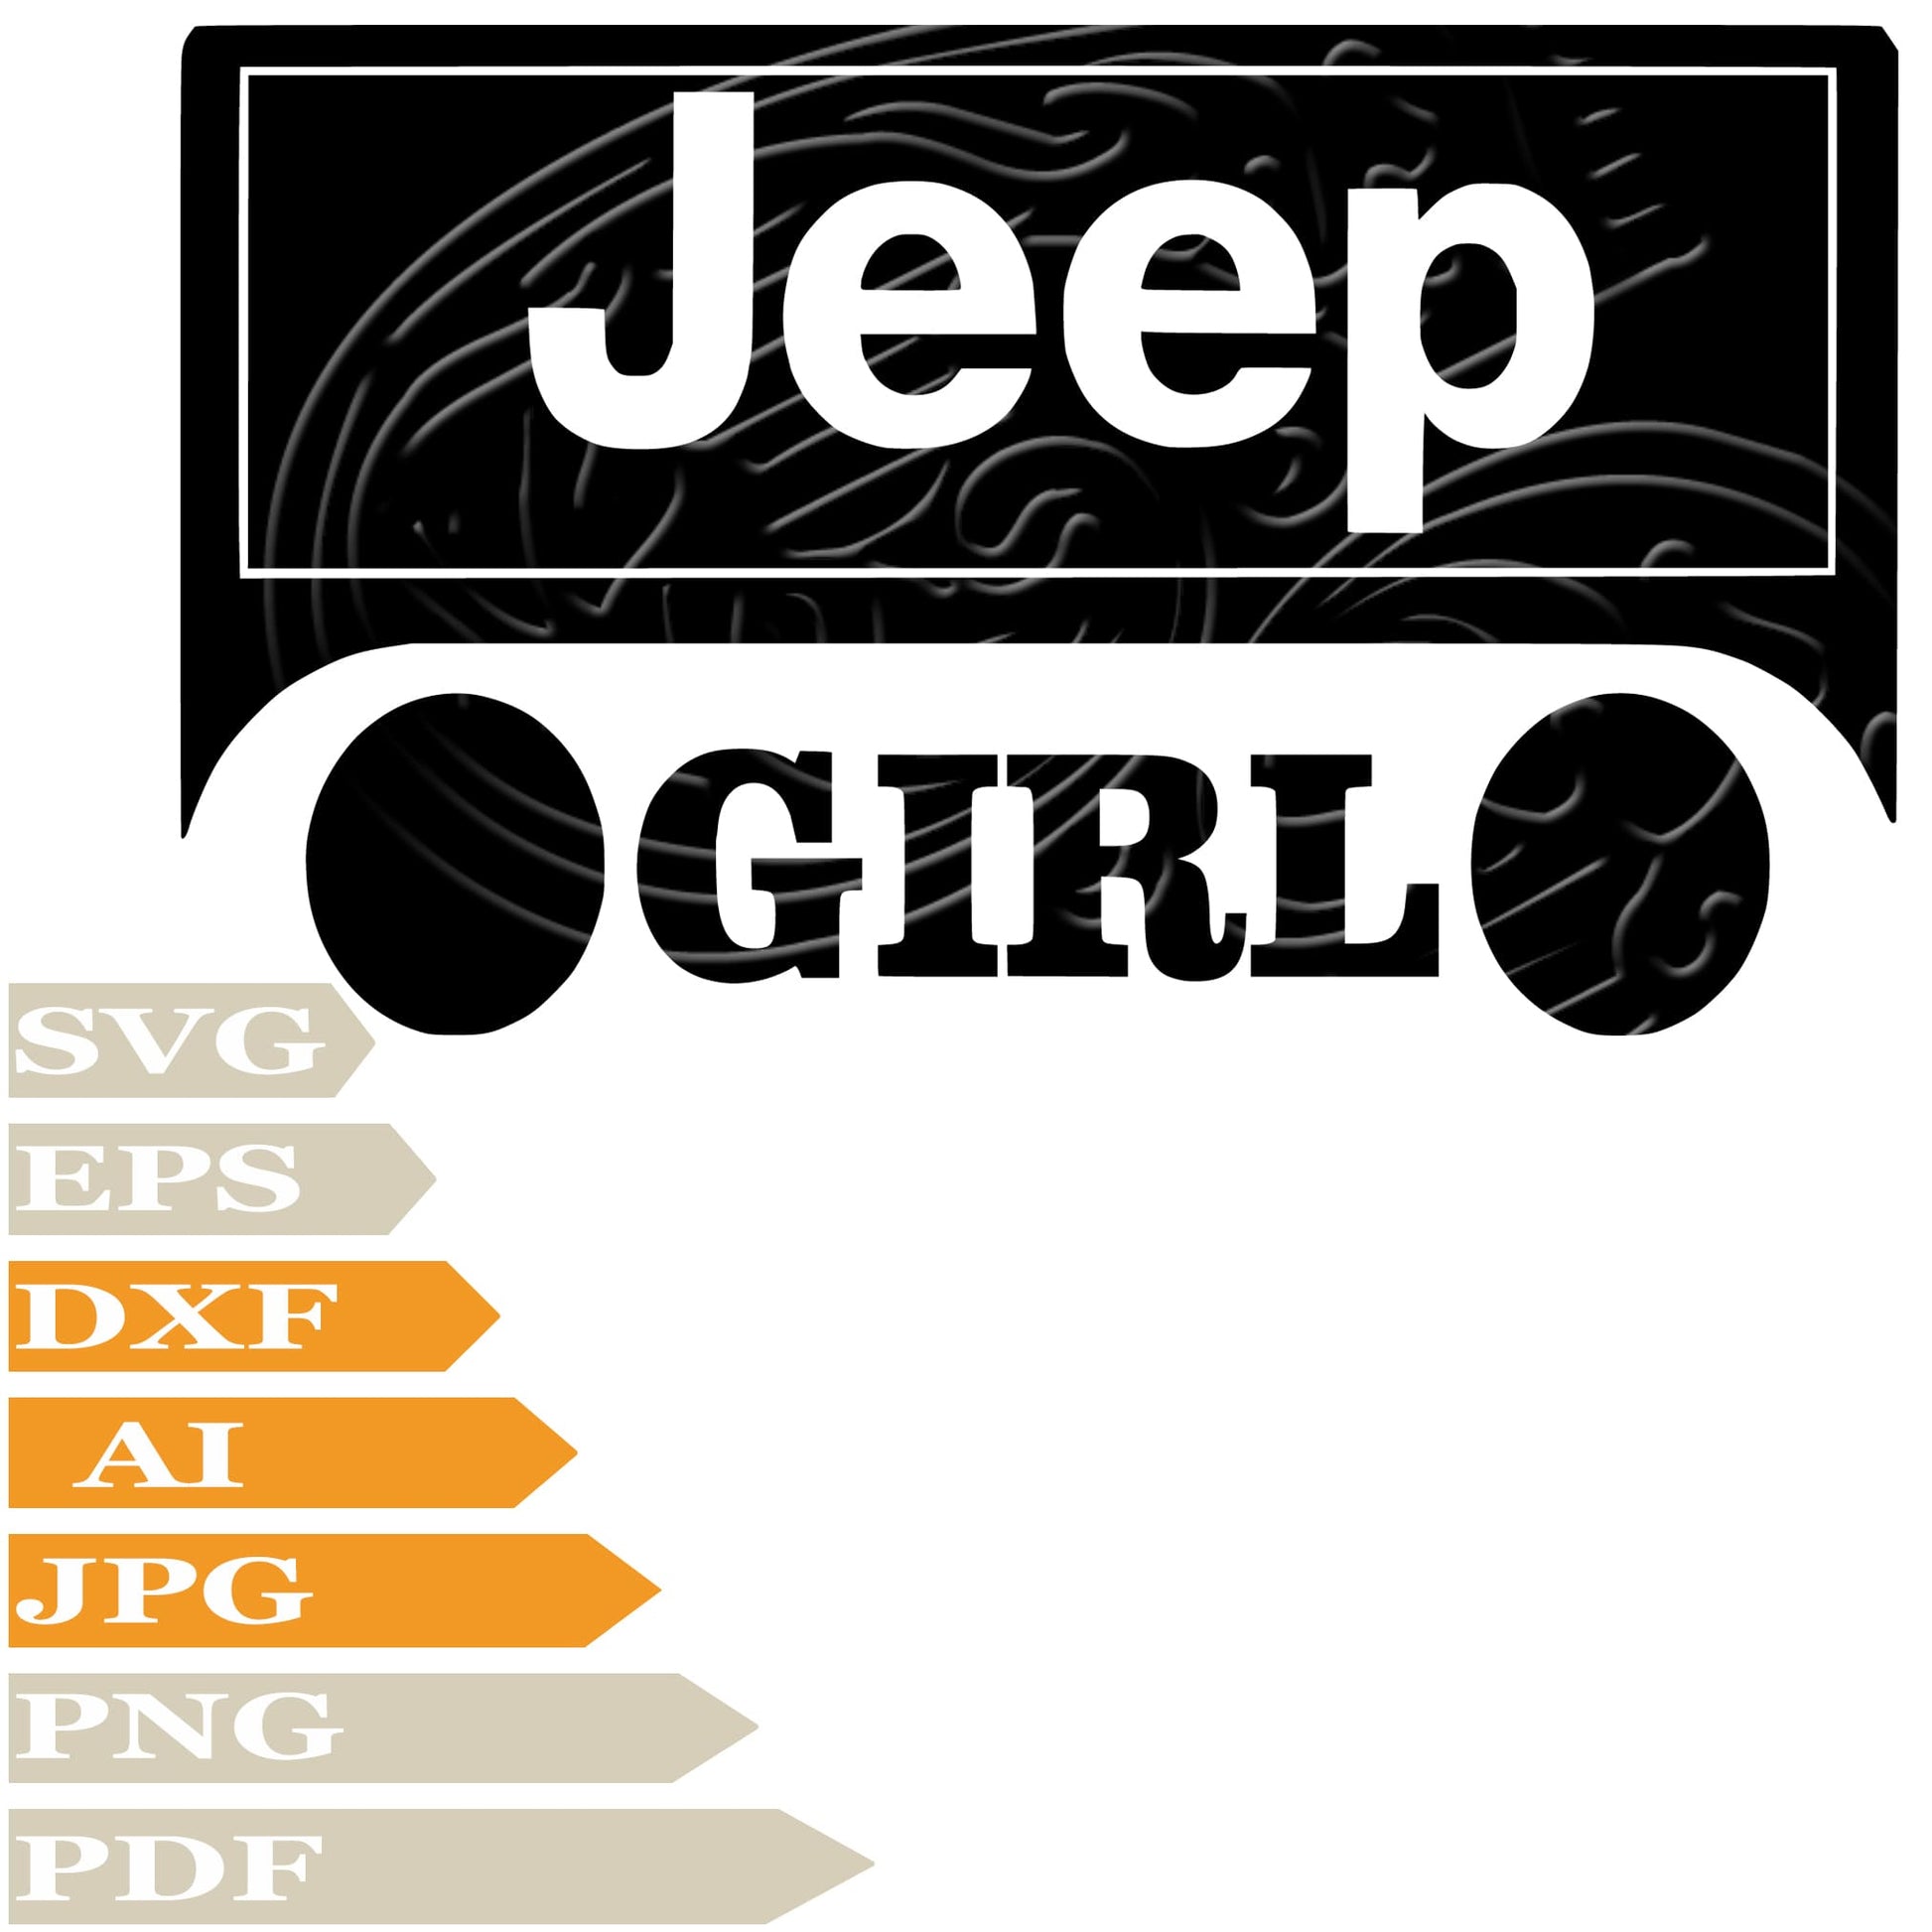 Jeep, Jeep Girl Logo Svg File, Image Cut, Png, For Tattoo, Silhouette, Digital Vector Download, Cut File, Clipart, For Cricut